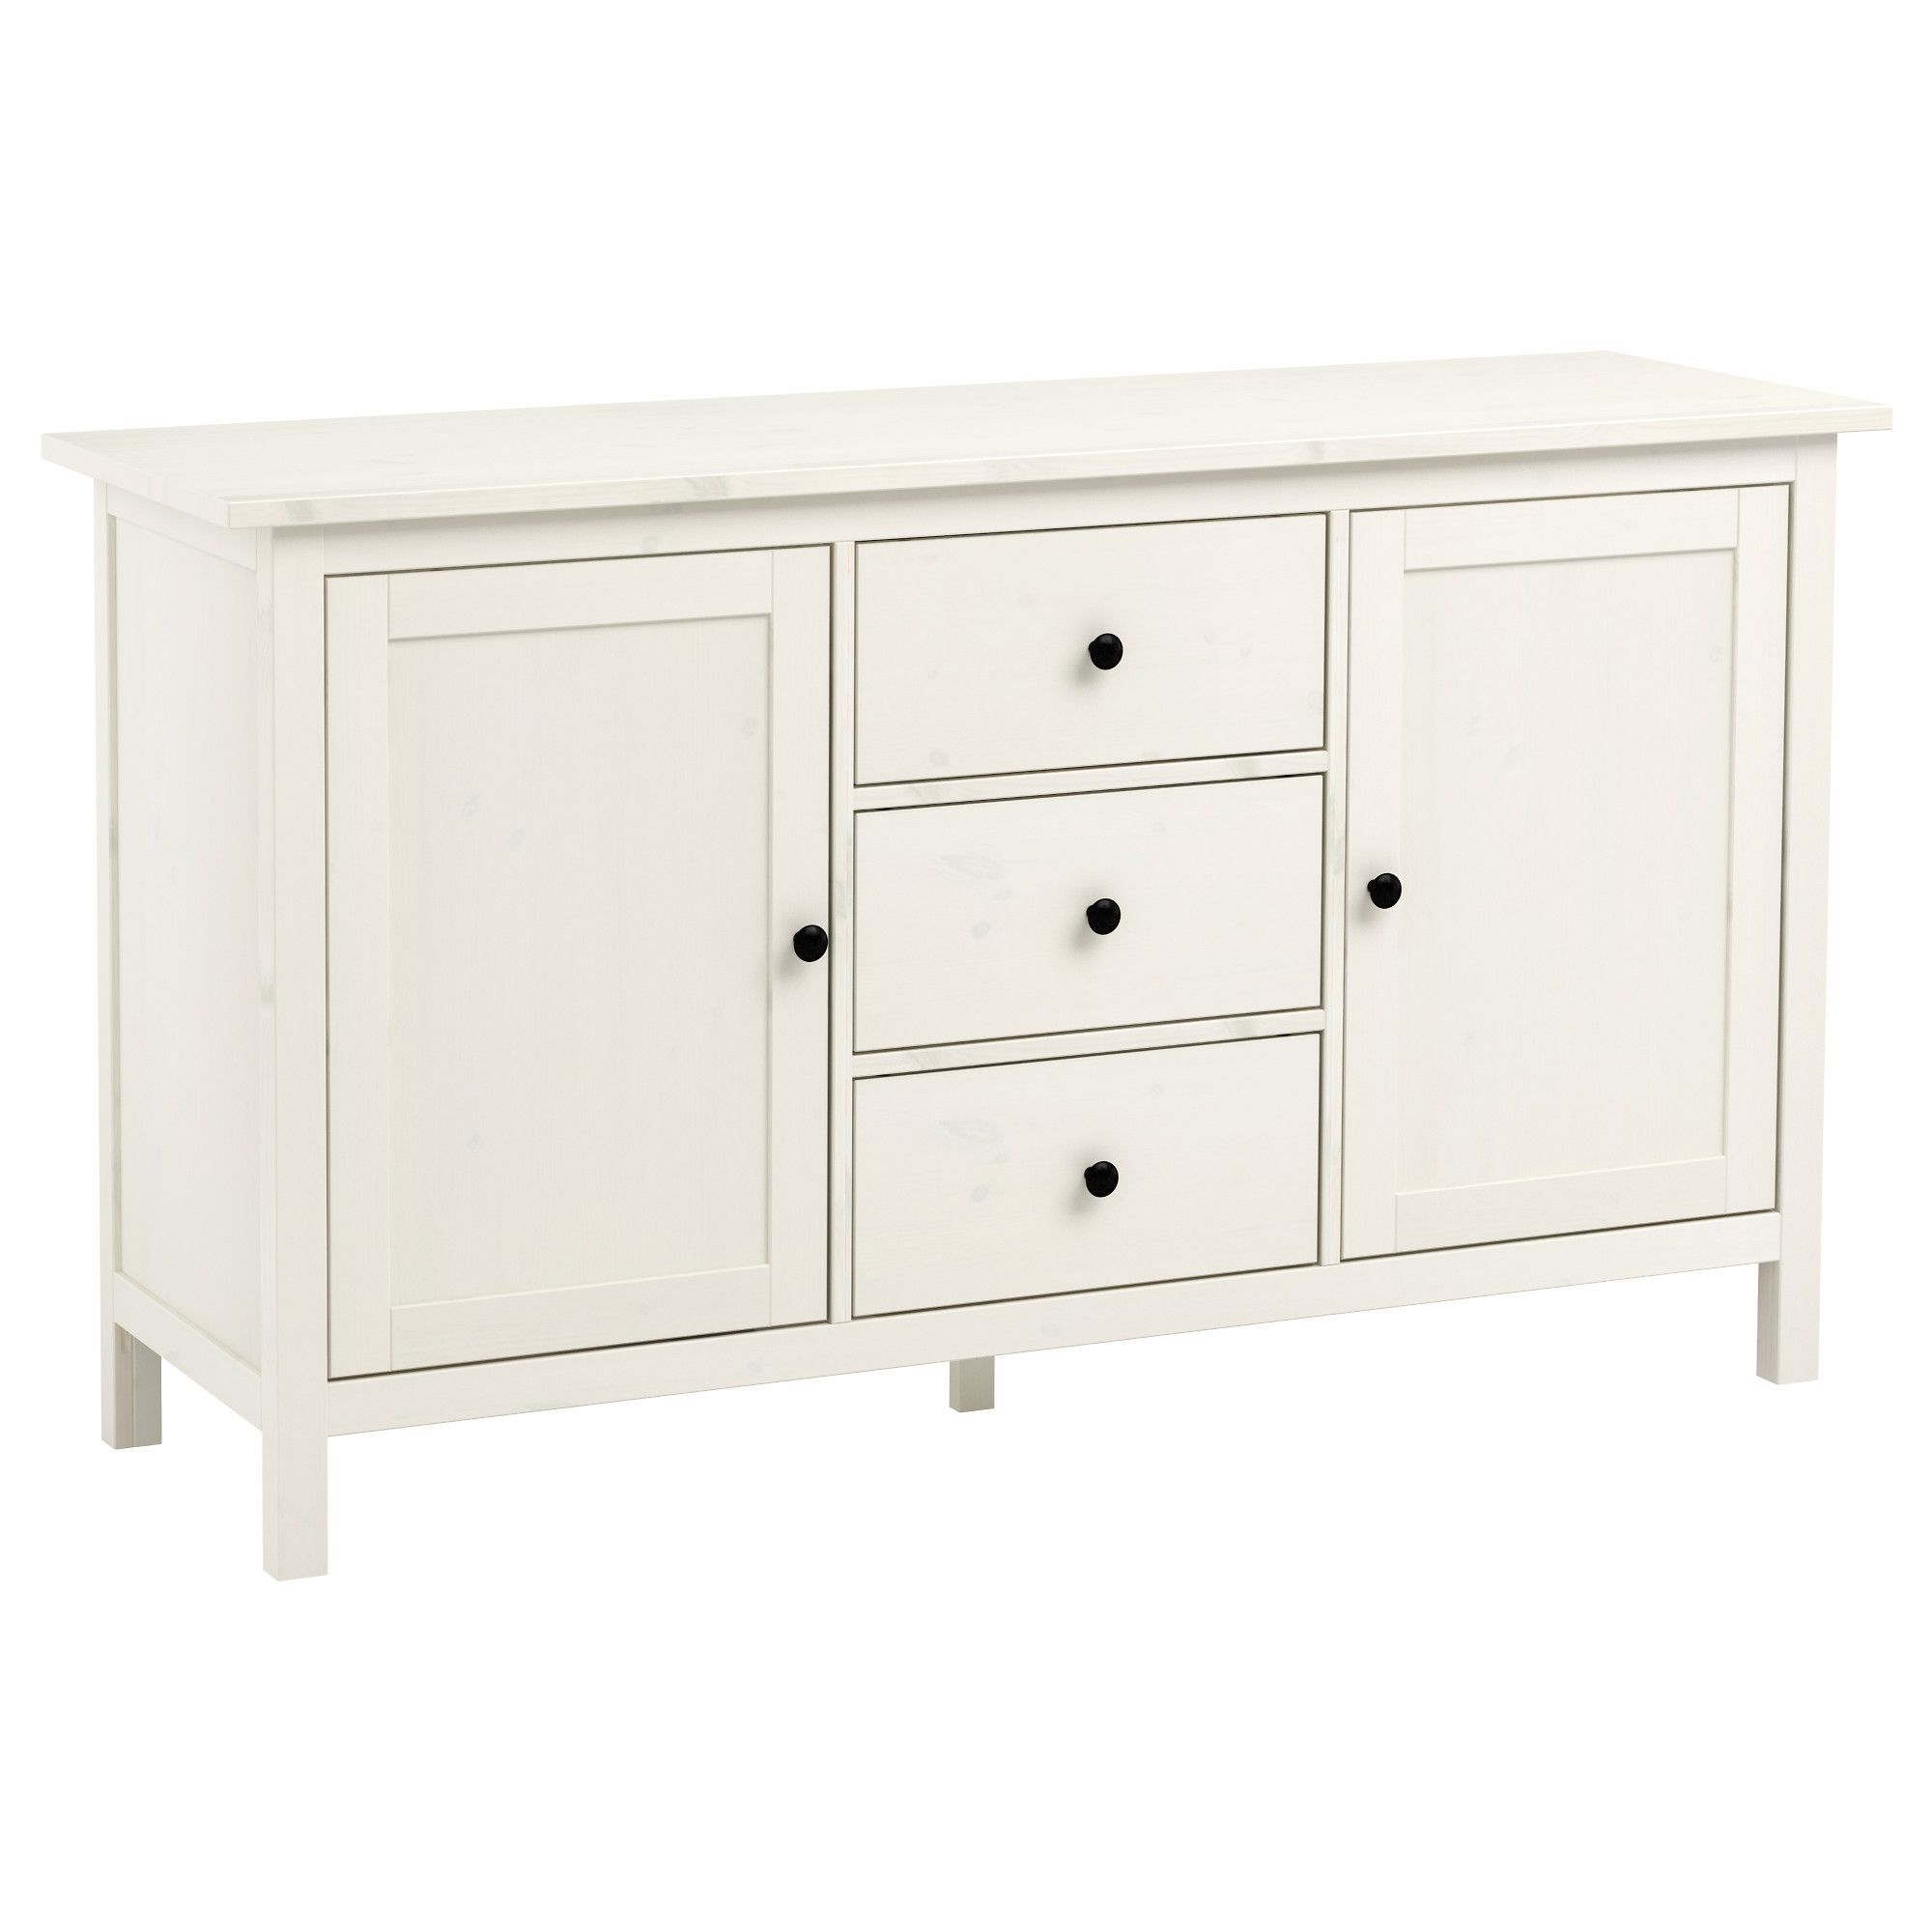 Ikea Hemnes White Stain Sideboard | Closets, Storage With Cher Sideboards (View 4 of 20)